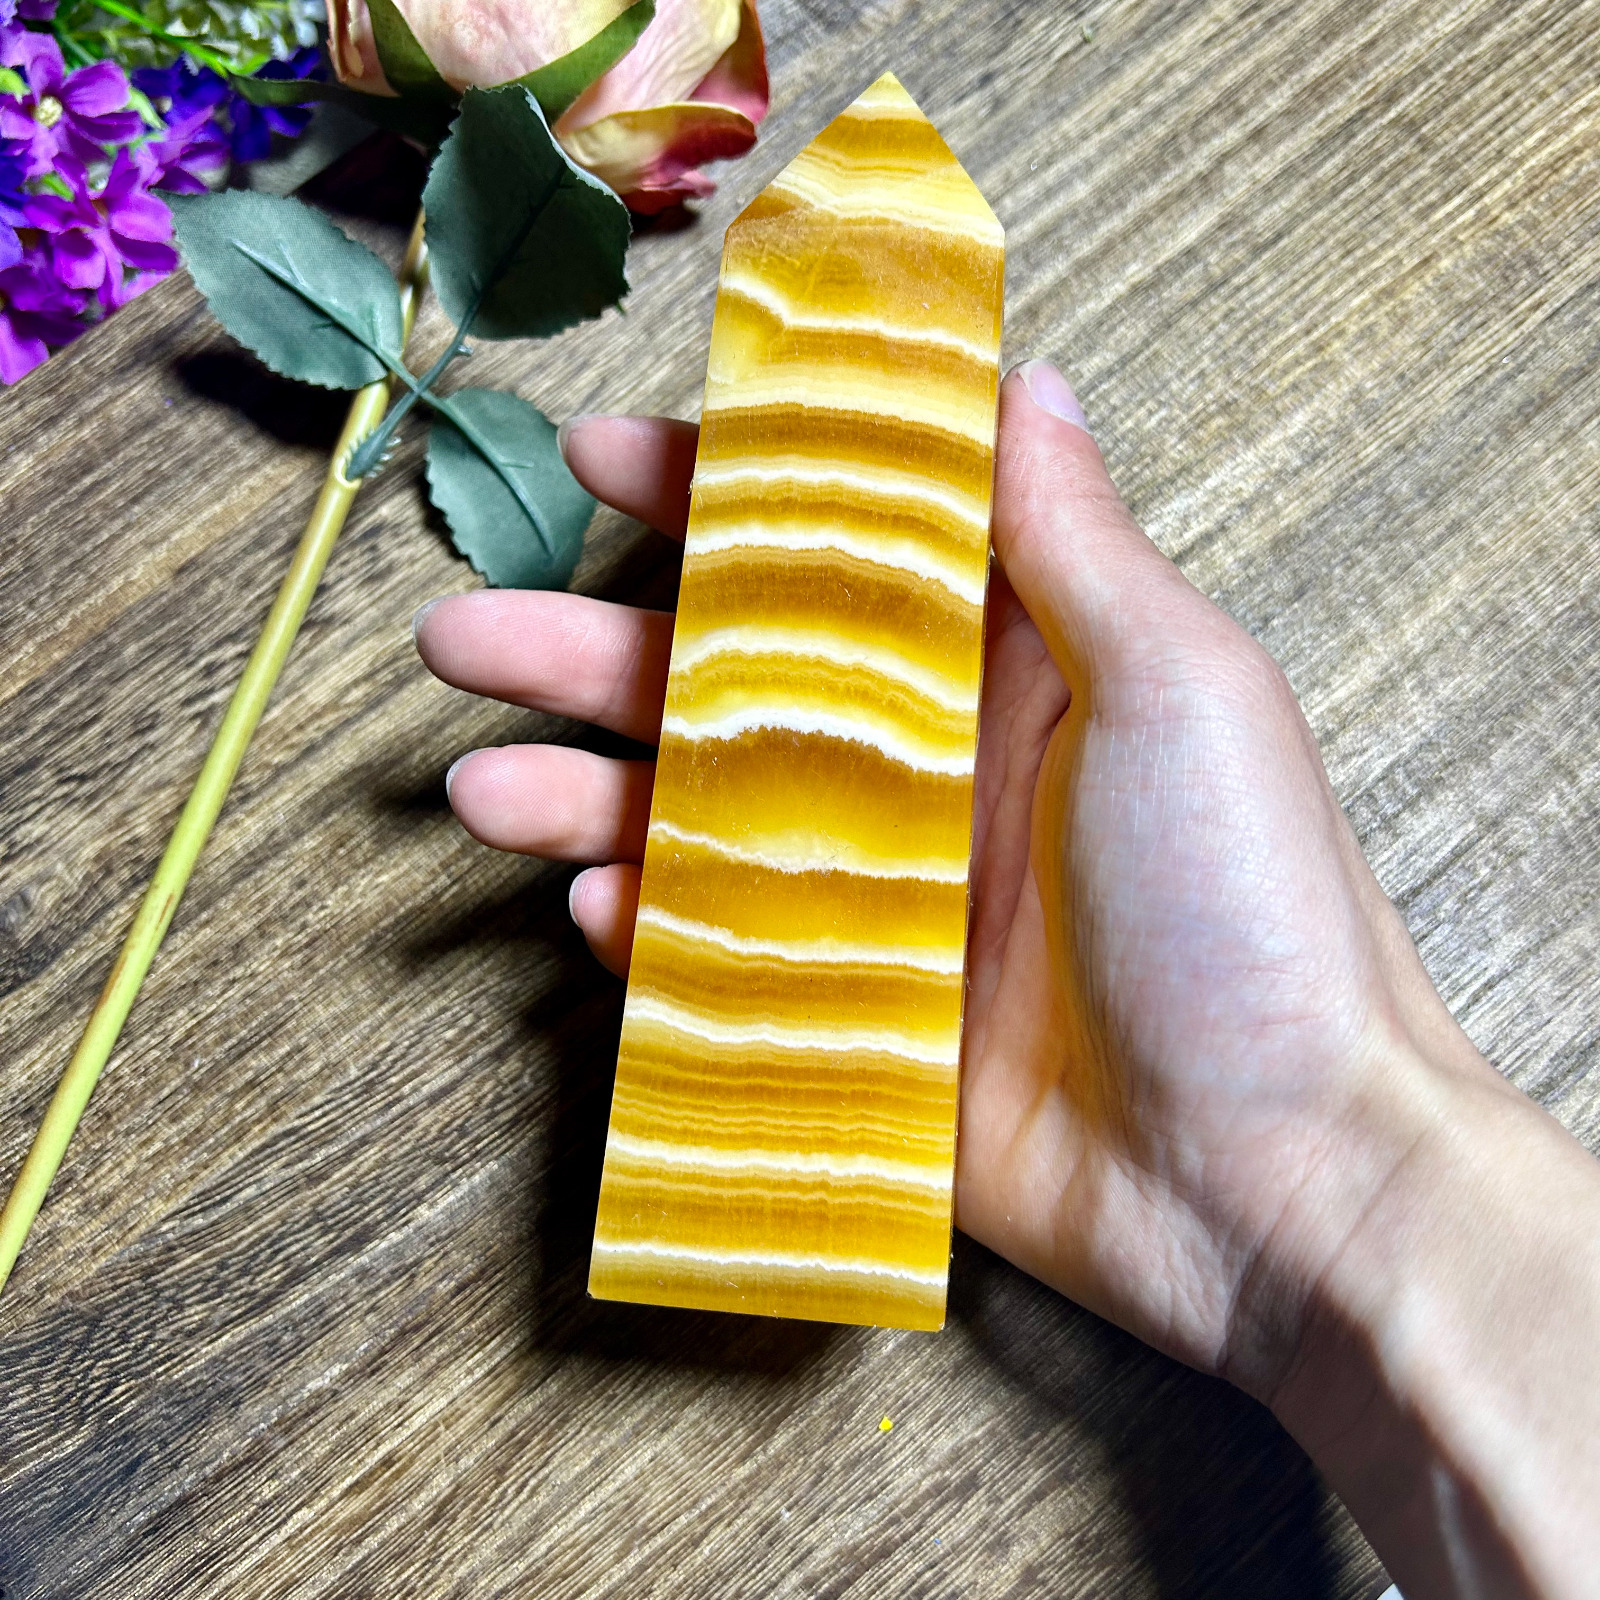 630g Banded Orange Calcite Pointed Tower Honey Yellow Stone Healing Crystal 2th